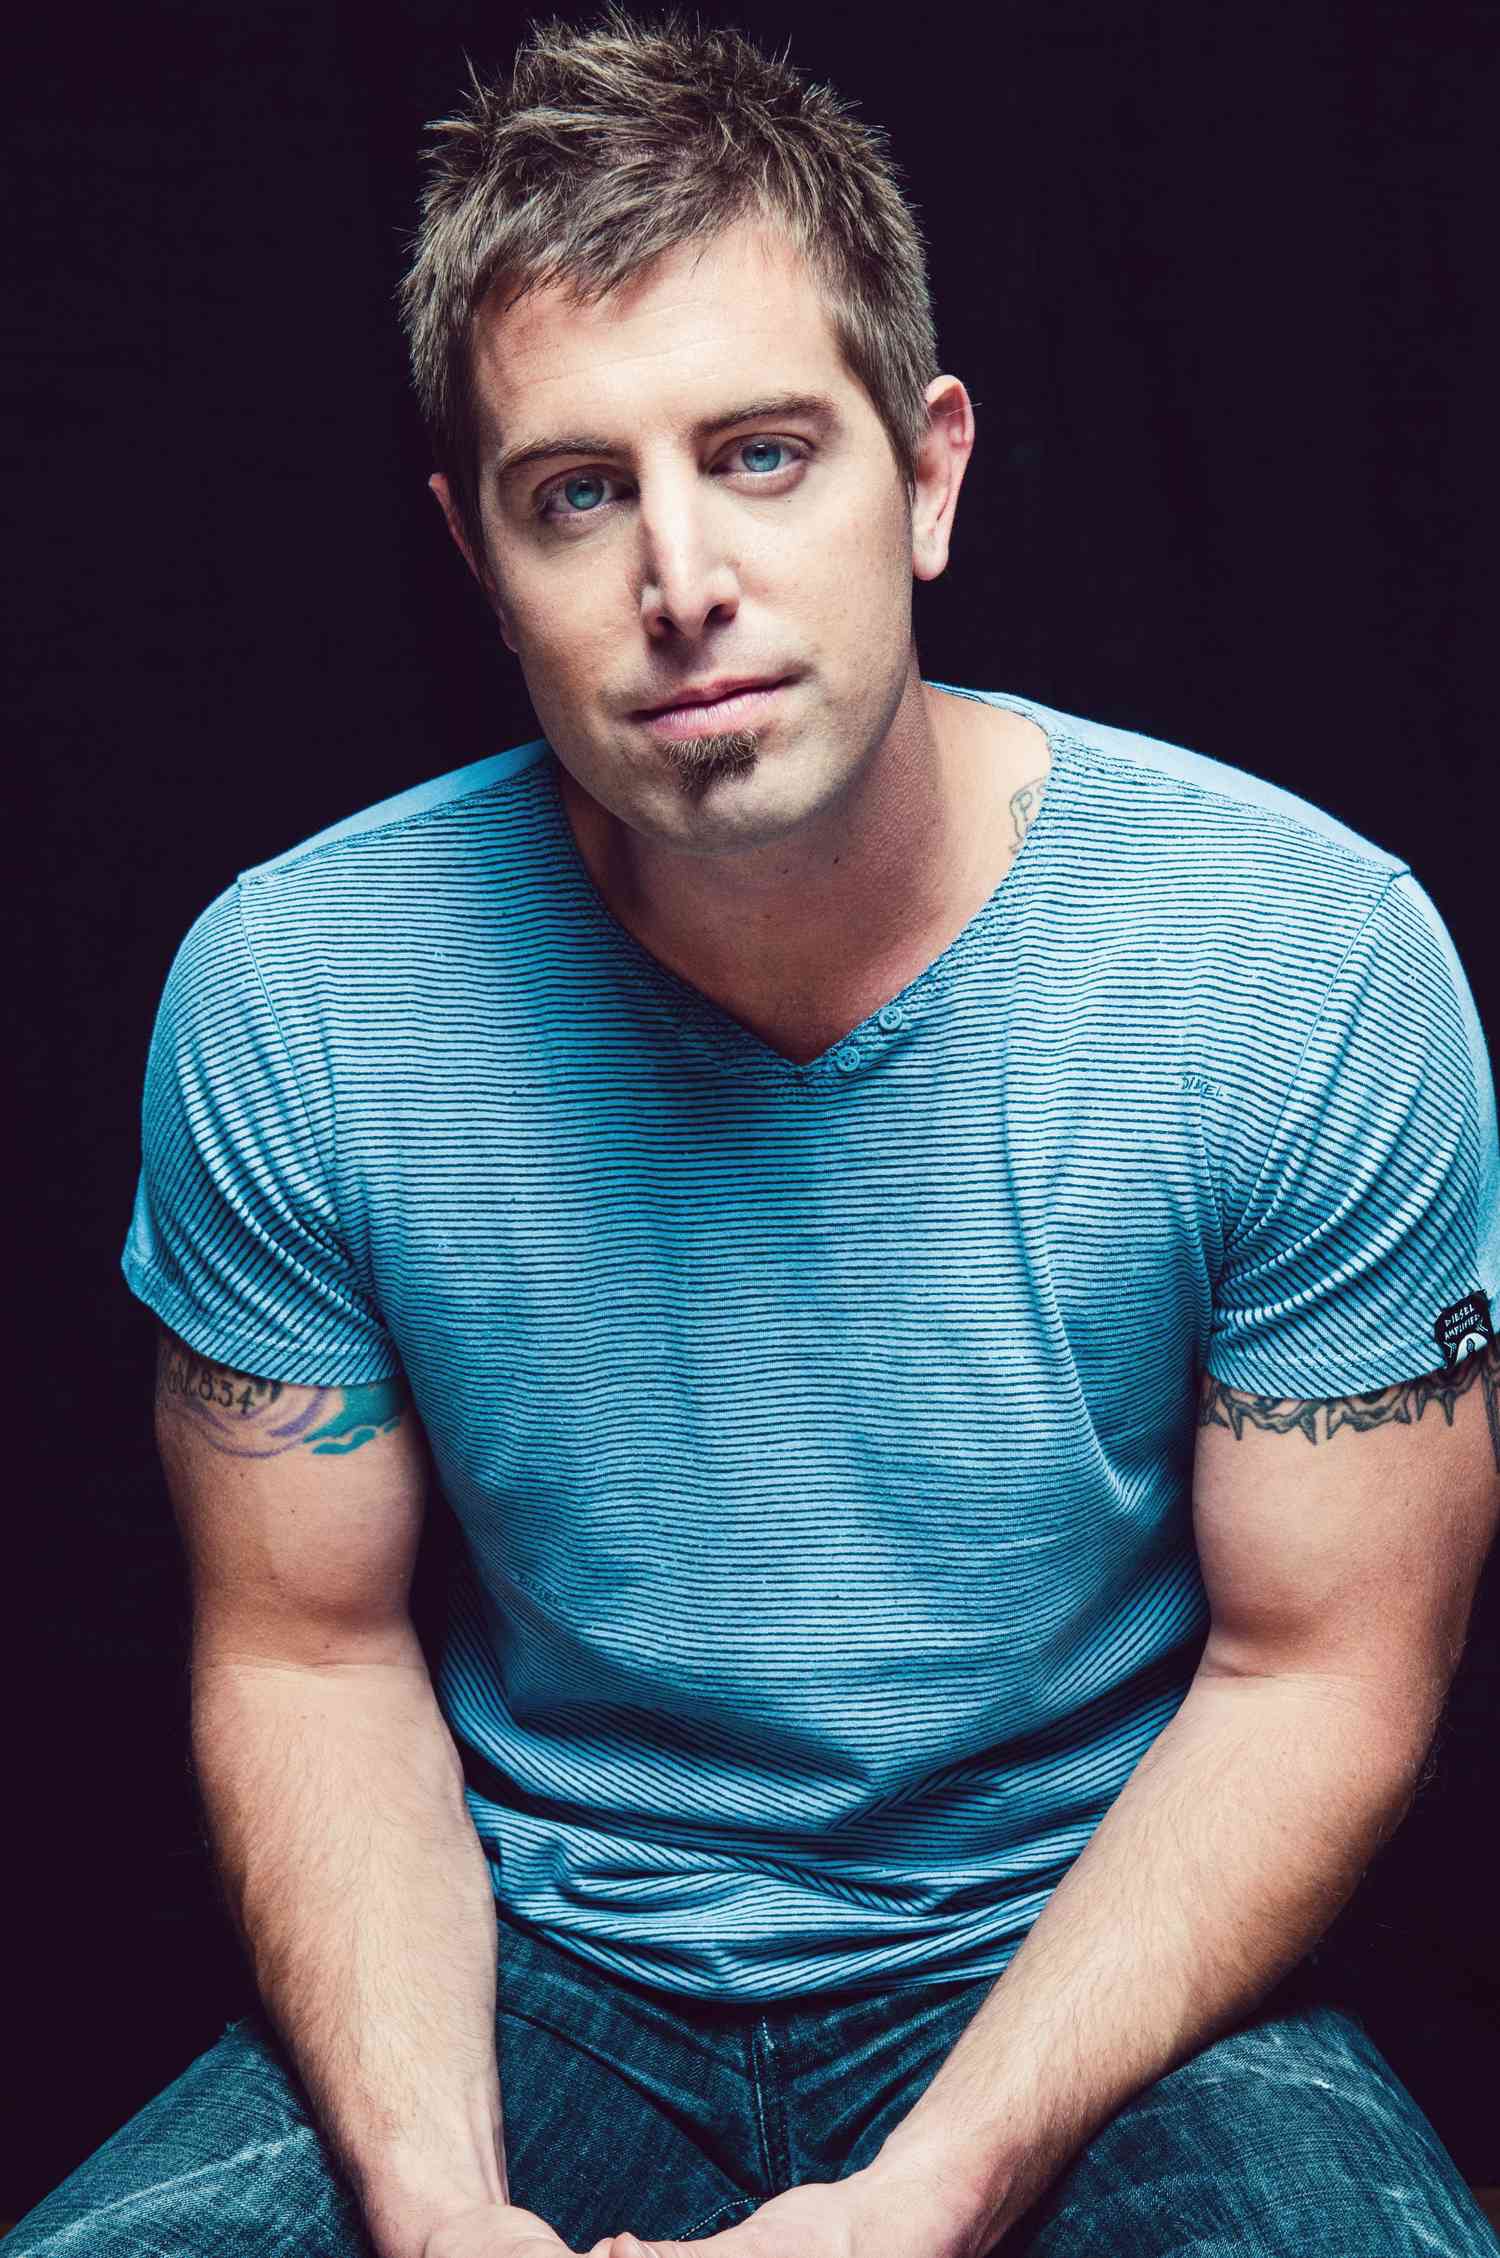 Jeremy Camp is a Christian music artist and worship leader who has been making music for over two decades. He is known for his powerful vocals, heartfelt lyrics, and inspiring messages of faith and hope. Camp has released numerous albums and singles over the years, and his music has touched the lives of countless people around the world. #JeremyCamp